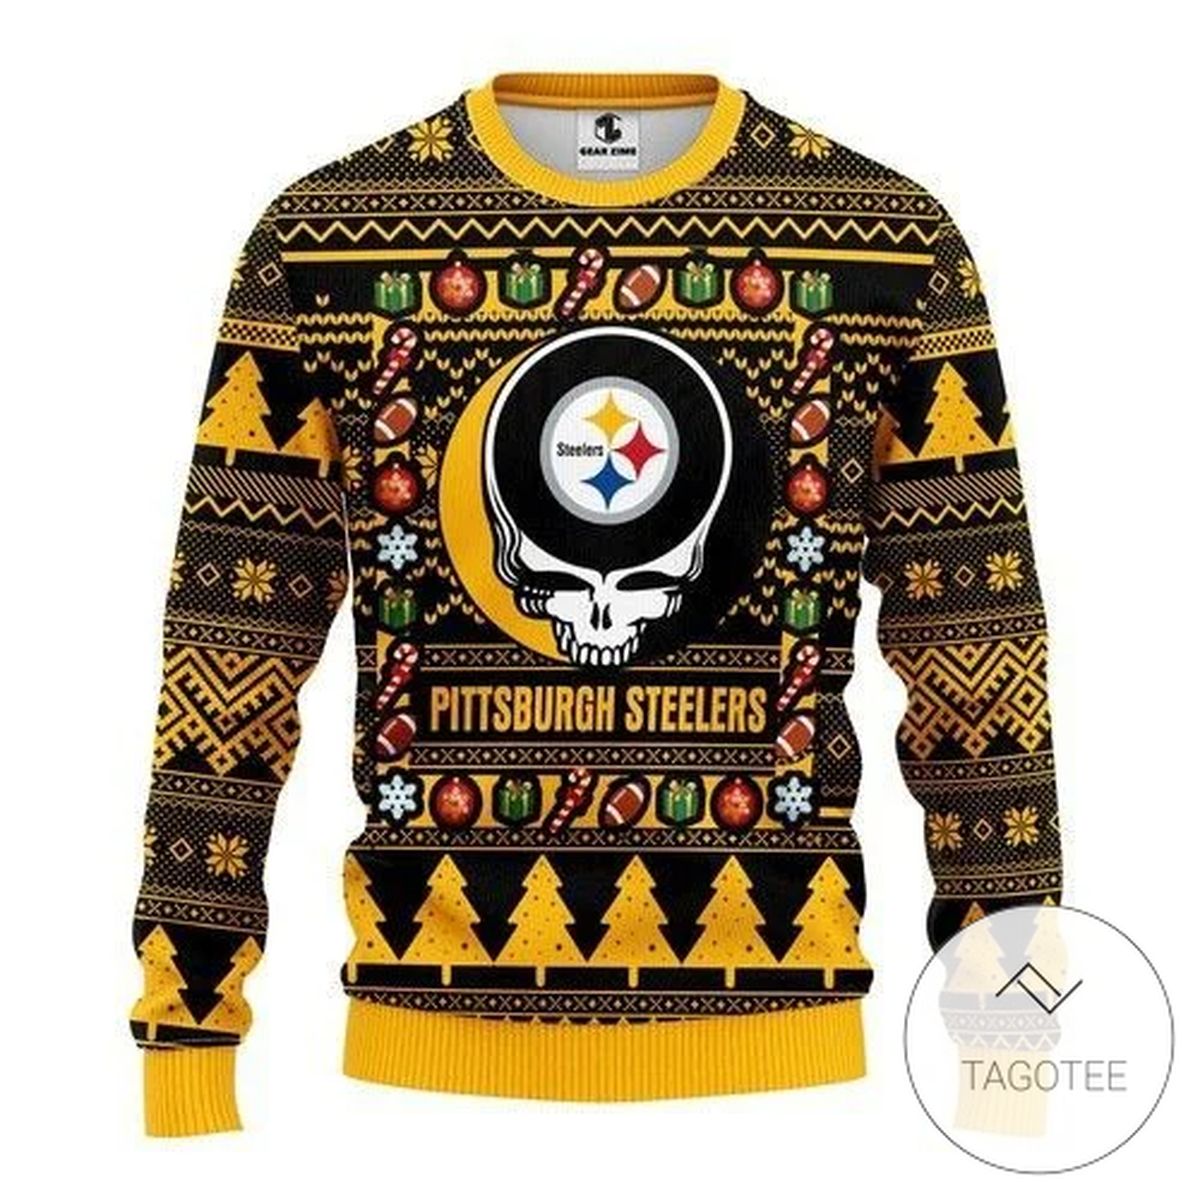 Pittsburgh Steelers Grateful Dead Sweatshirt Knitted Ugly Christmas Sweater